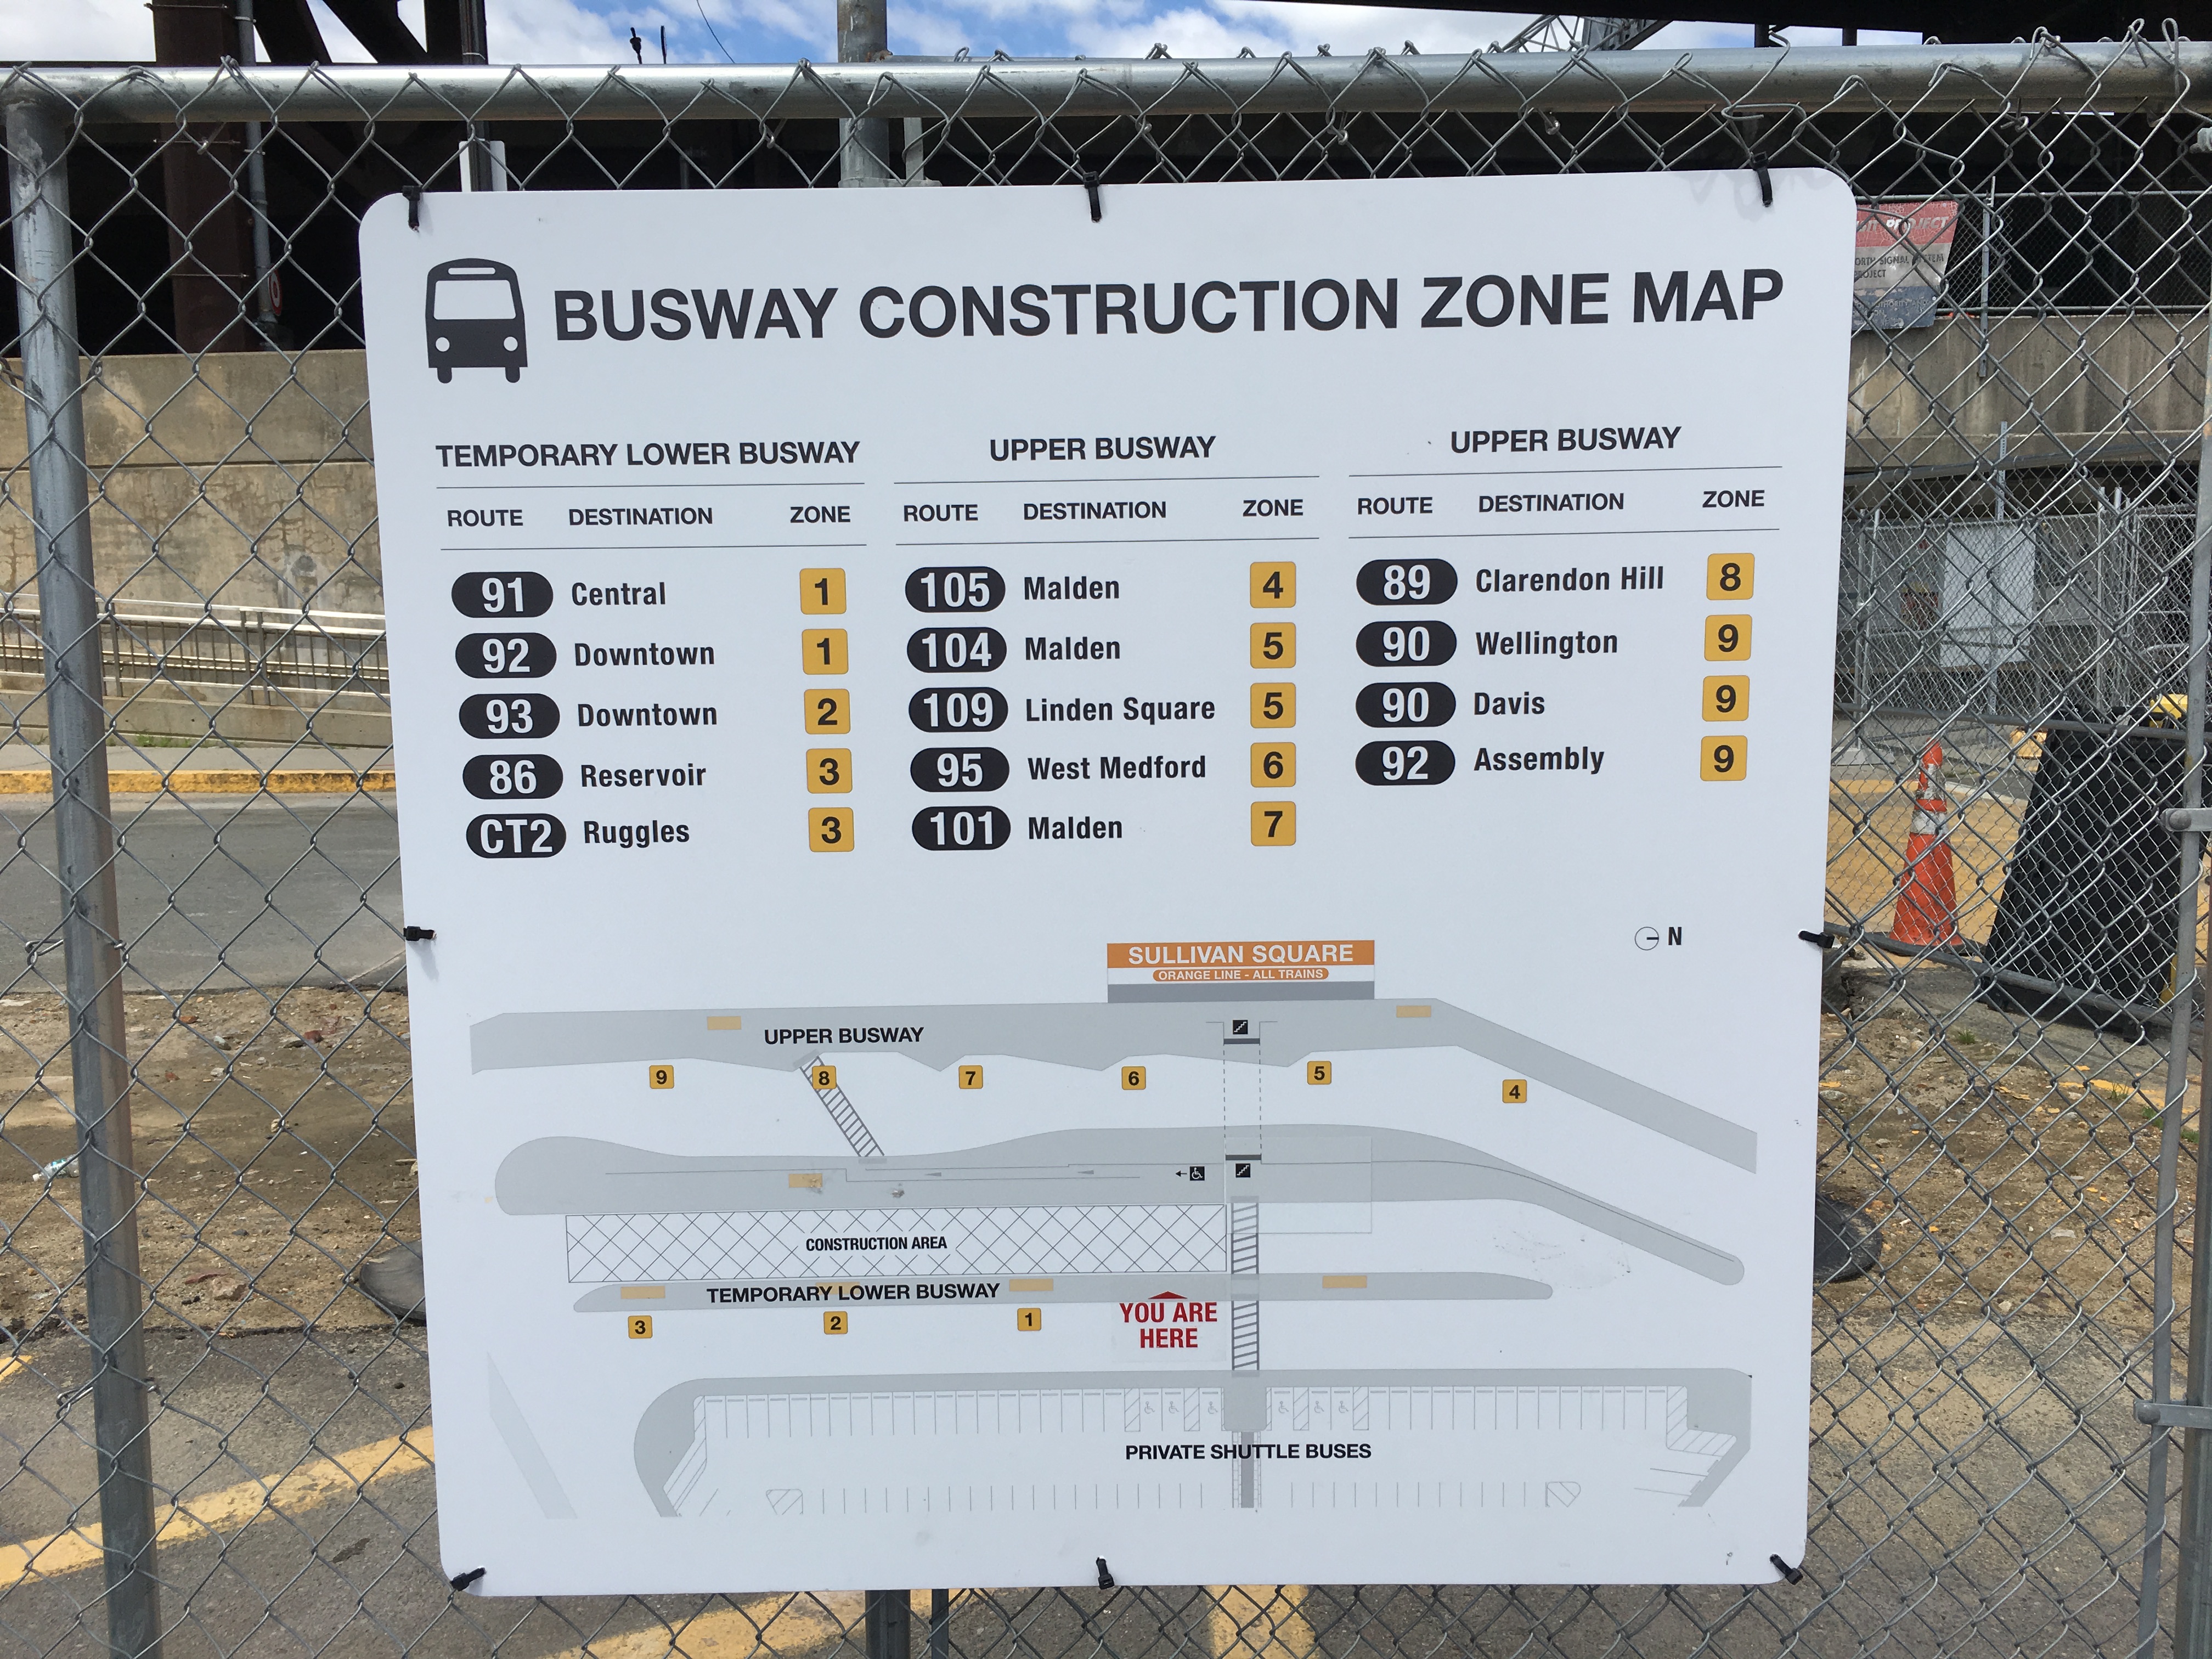 Photo of a map posted on a chain link fence of the temporary lower busway at Sullivan